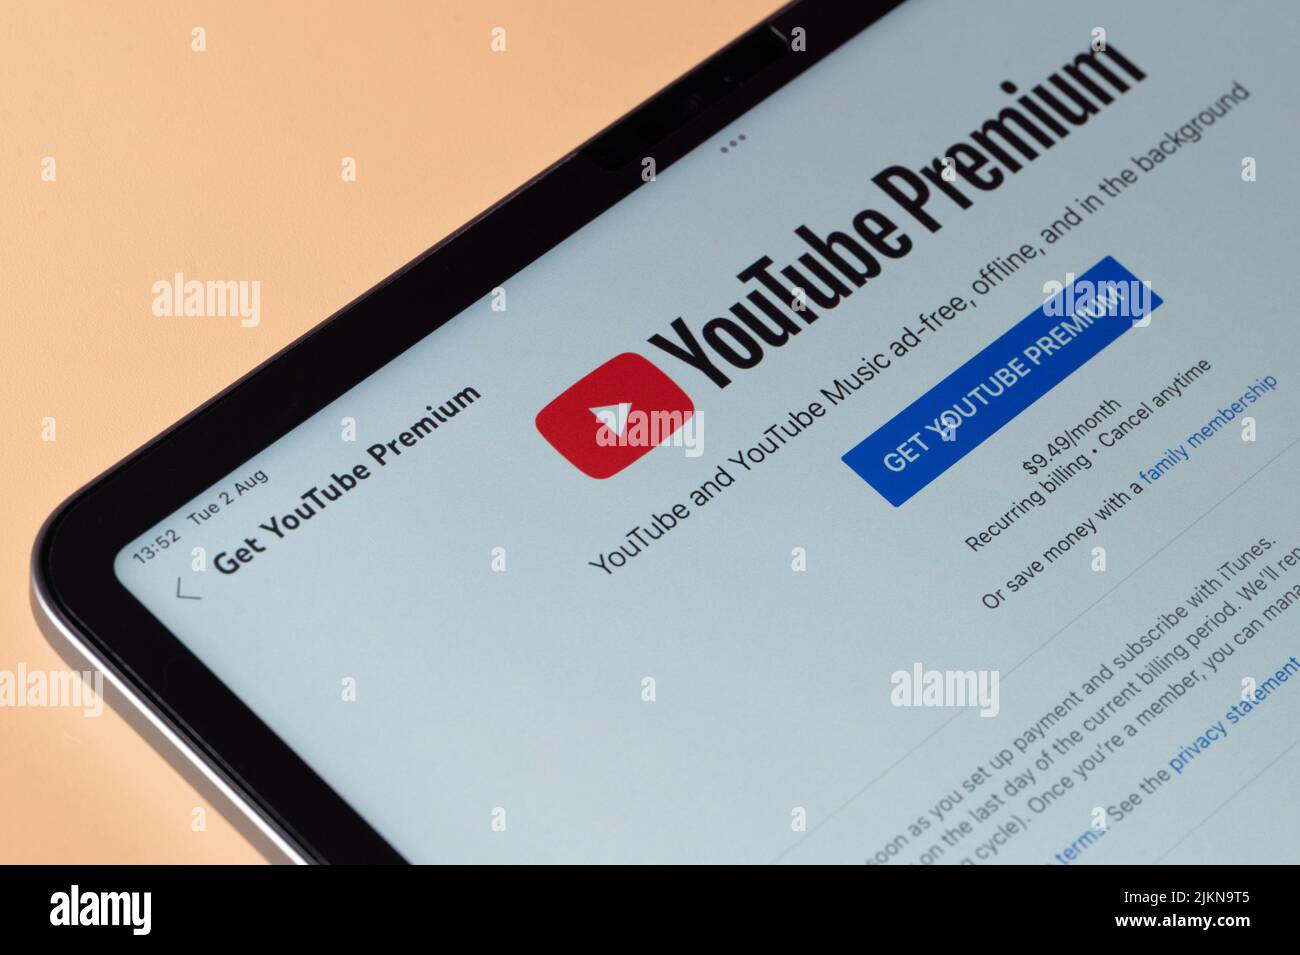 New york, USA - august 2, 2022: Get youtube premium service subscription on laptop screen close up view Stock Photo